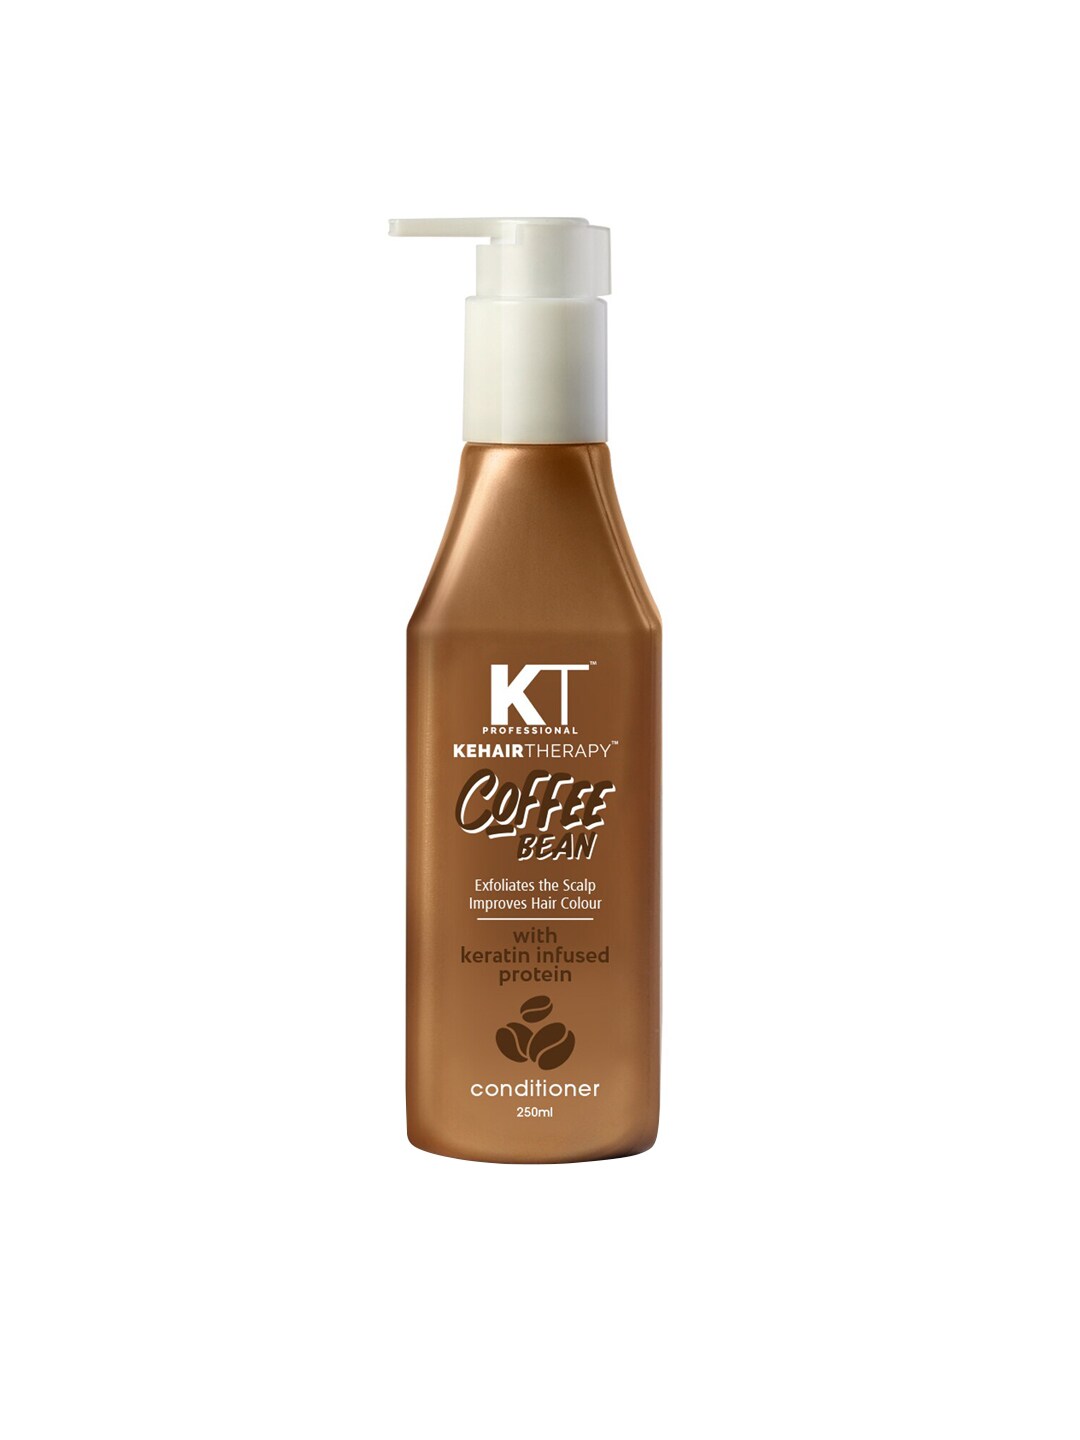 KEHAIRTHERAPY KT Professional Coffee Bean With Keratin Infused Protein Conditioner 250 ml Price in India